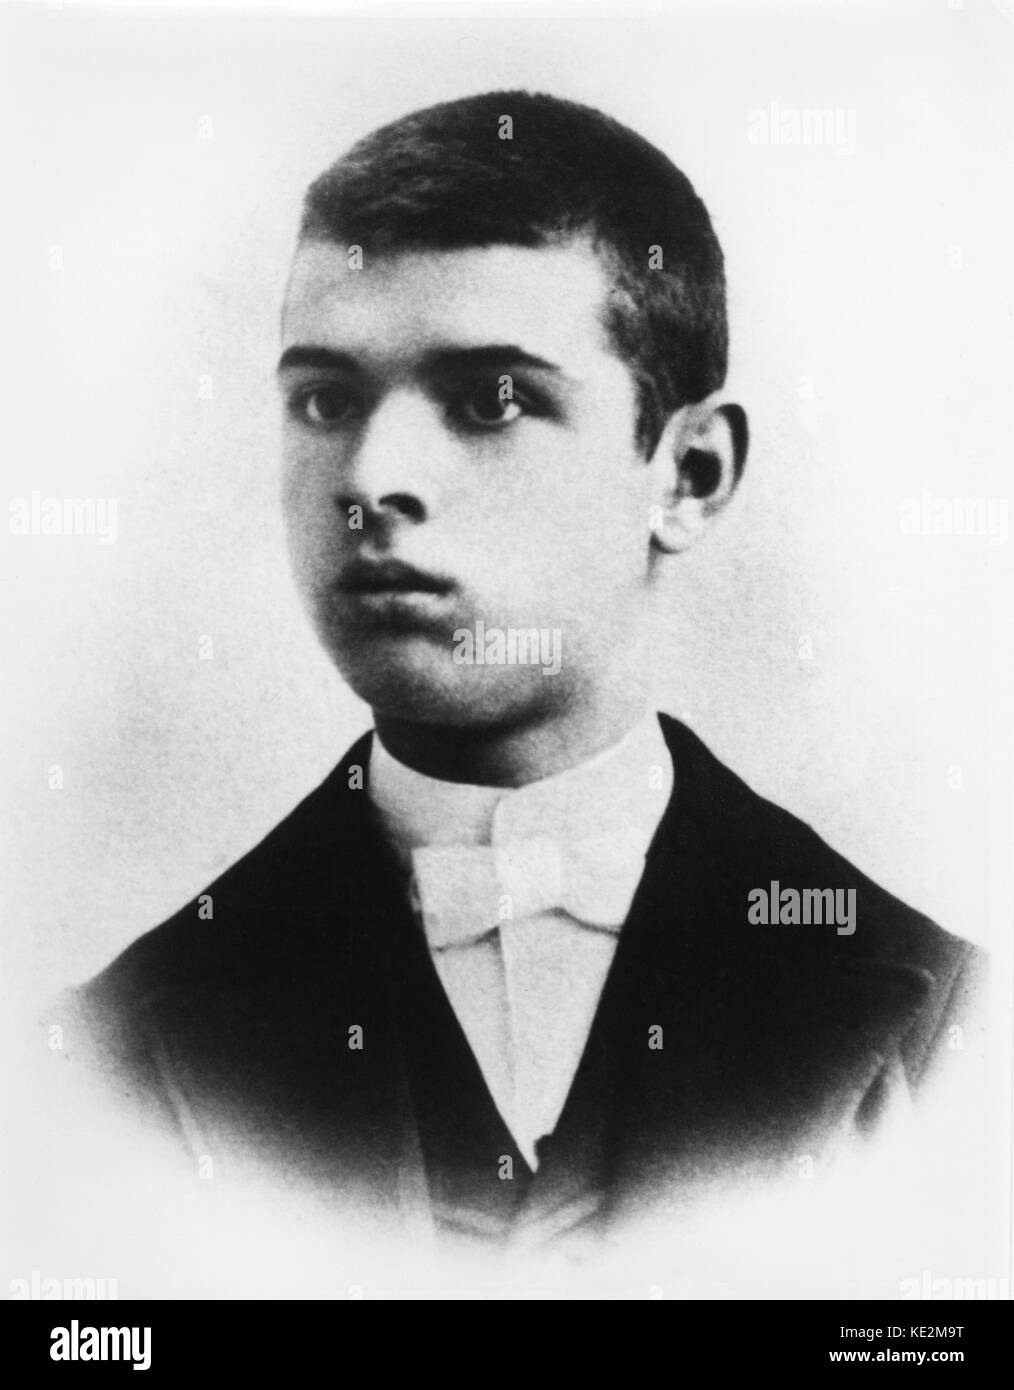 Pablo Casals - portrait of the Catalan cellist & composer as a youth 29 December 1876 - 22 October 1973.  Taken shortly before he left Barcelona in 1894 to go study in Madrid. Stock Photo